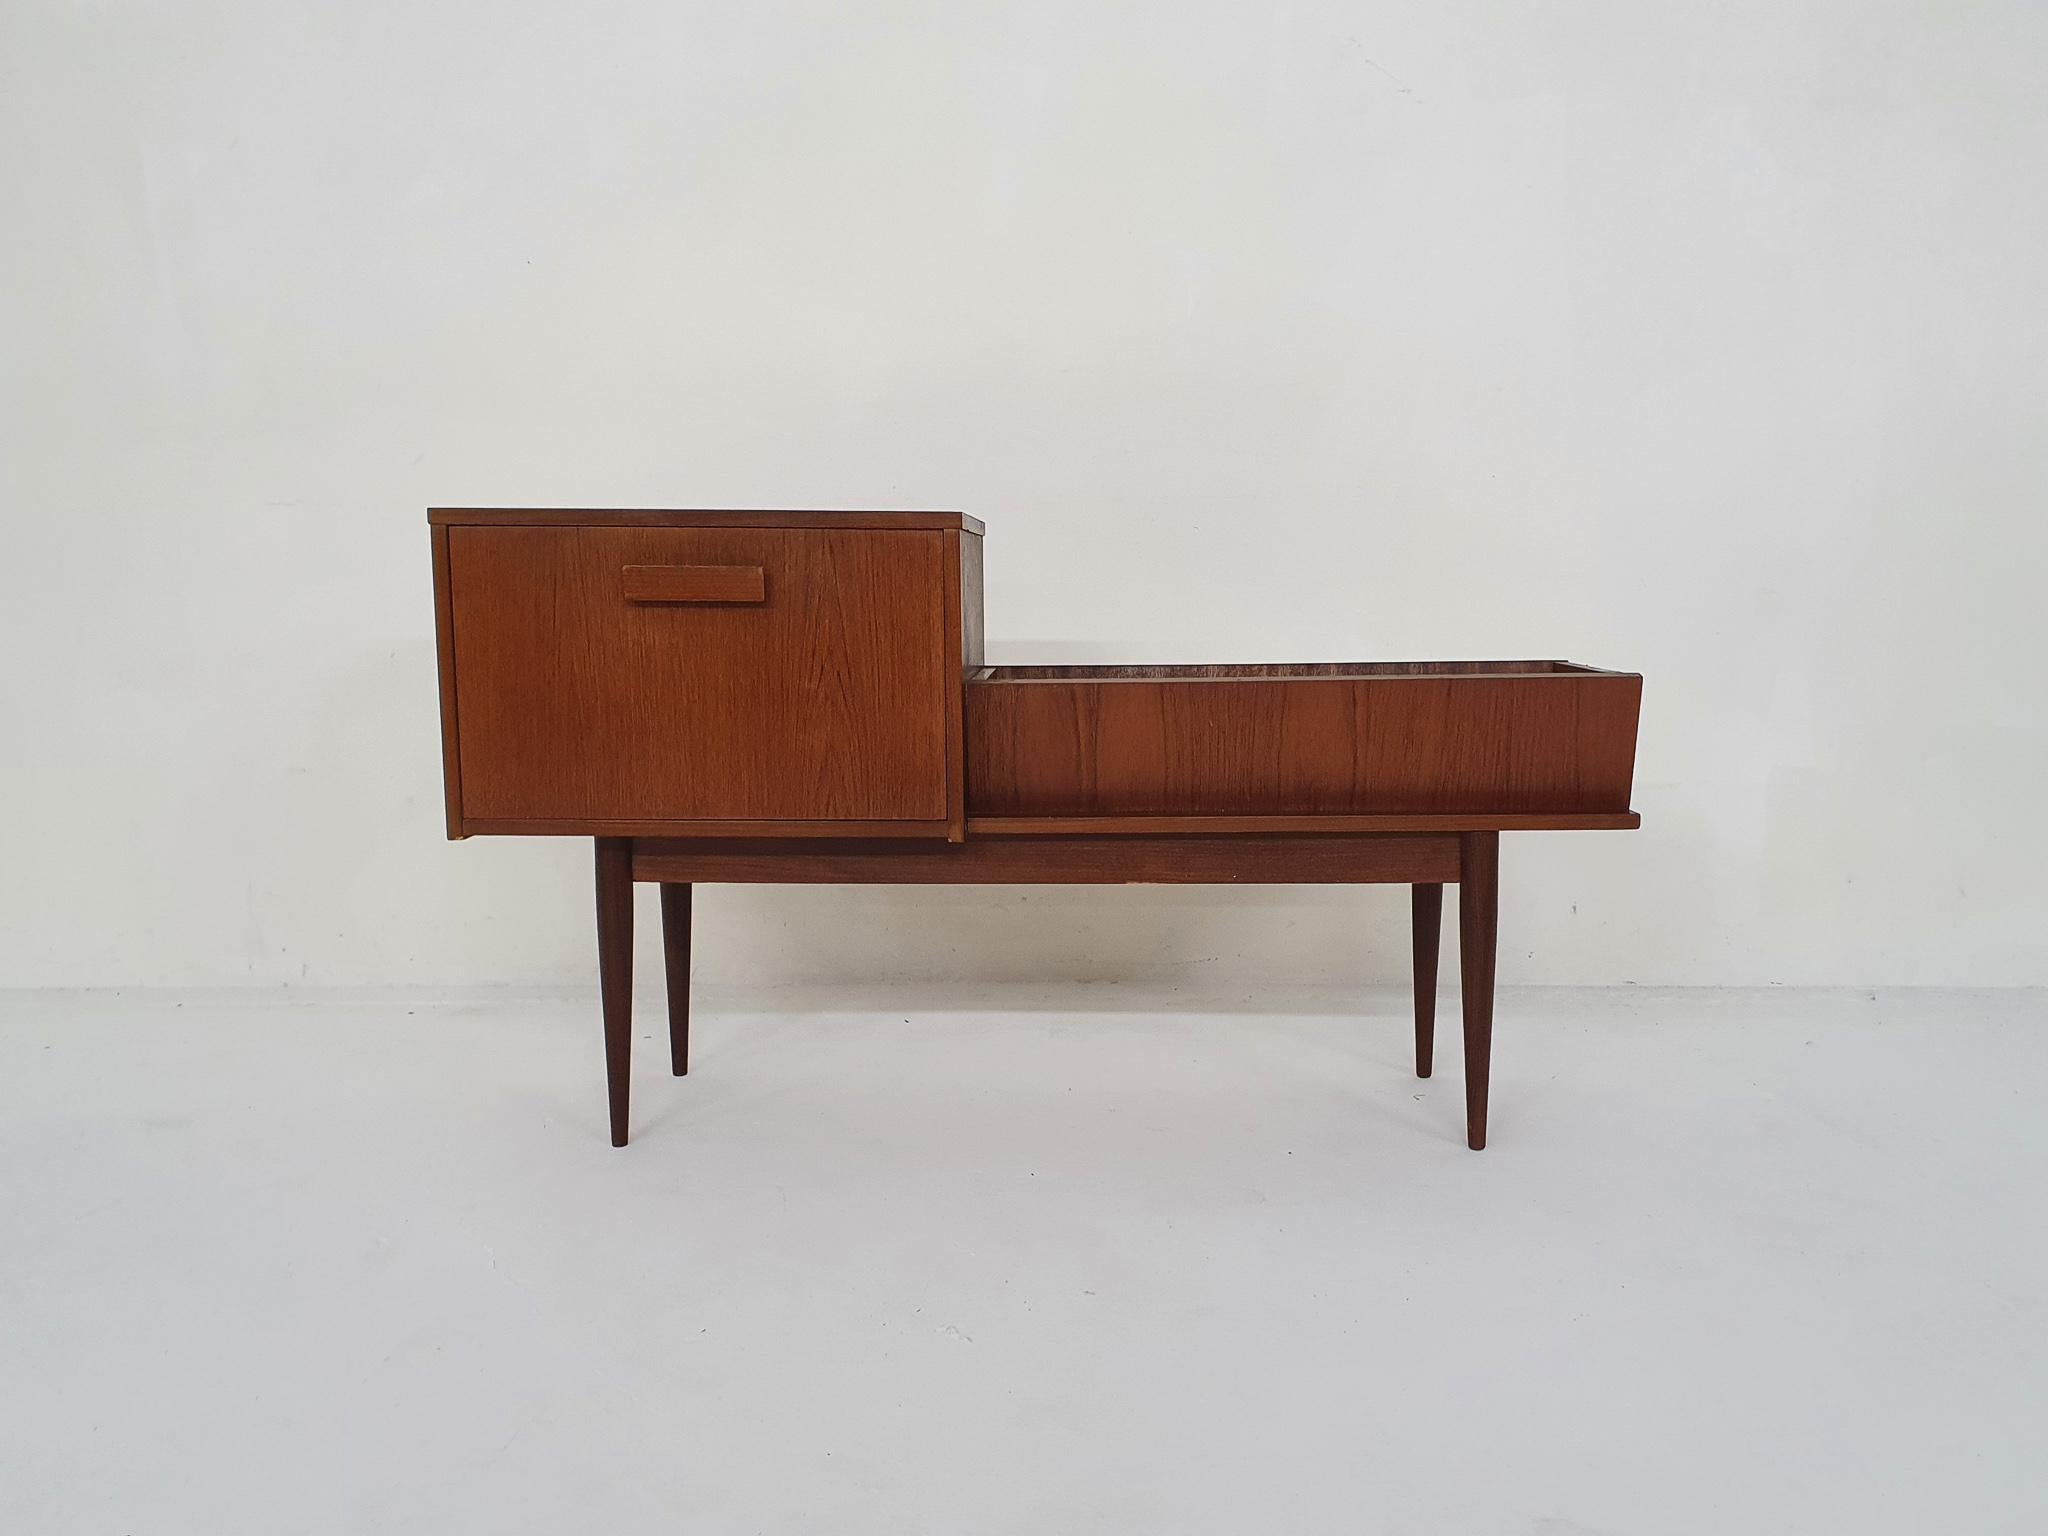 Teak cabinet with plant stand.
In good condition. The formar owner made two holes in the back, probably for wires for the record player.

